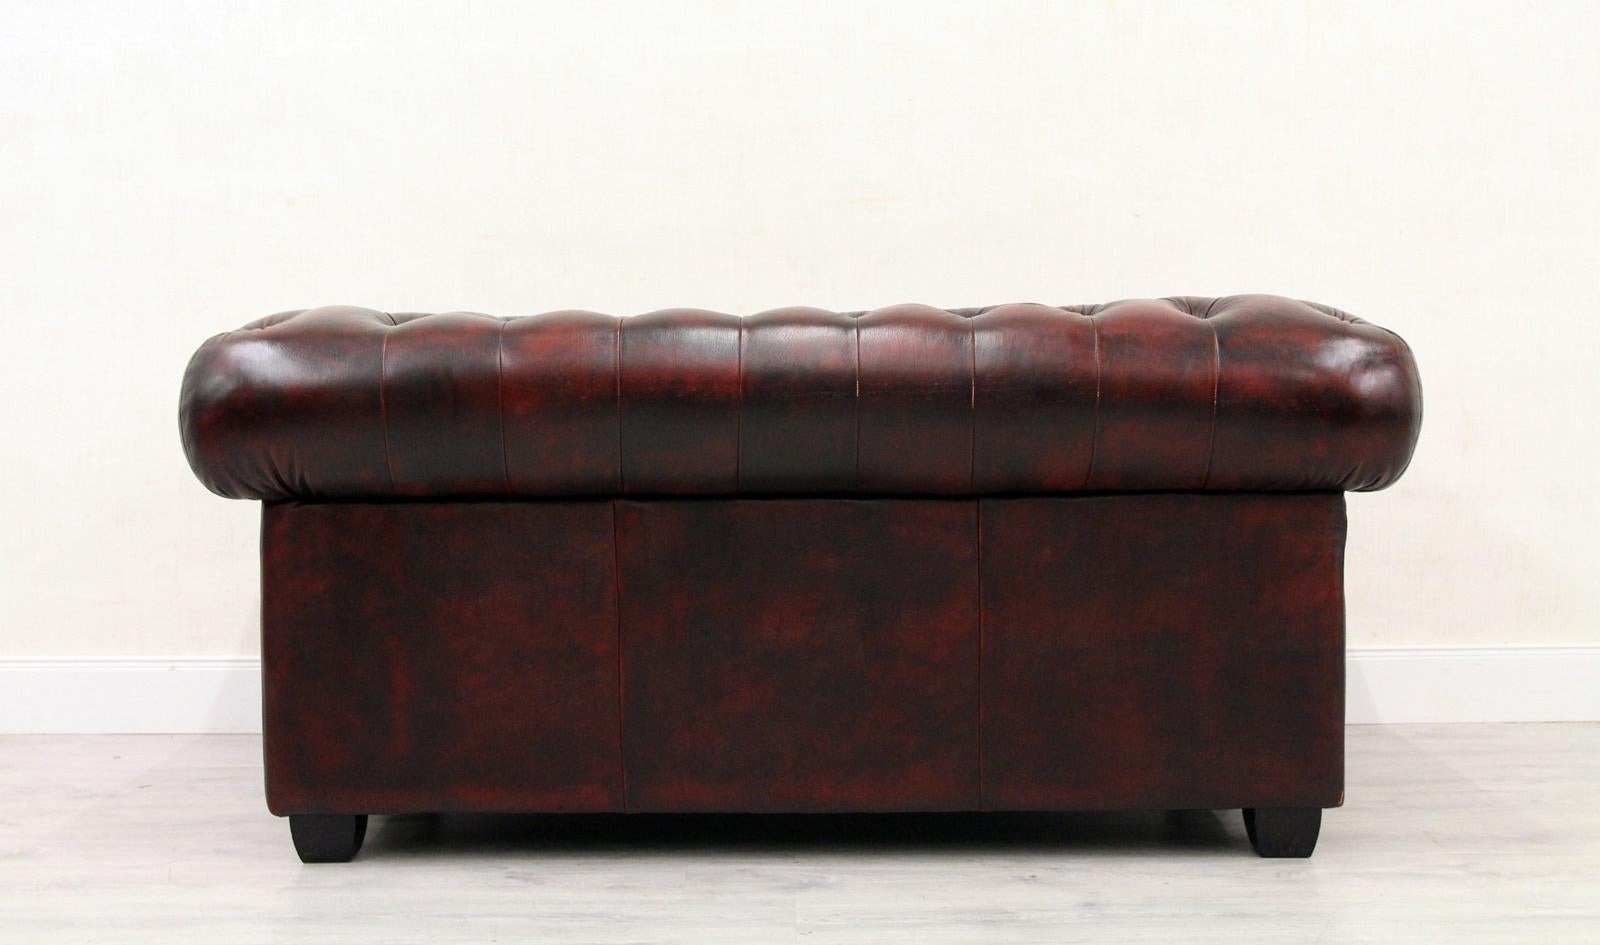 Chesterfield English Sofa Leather Antique Vintage Couch Chippendale im Angebot 7